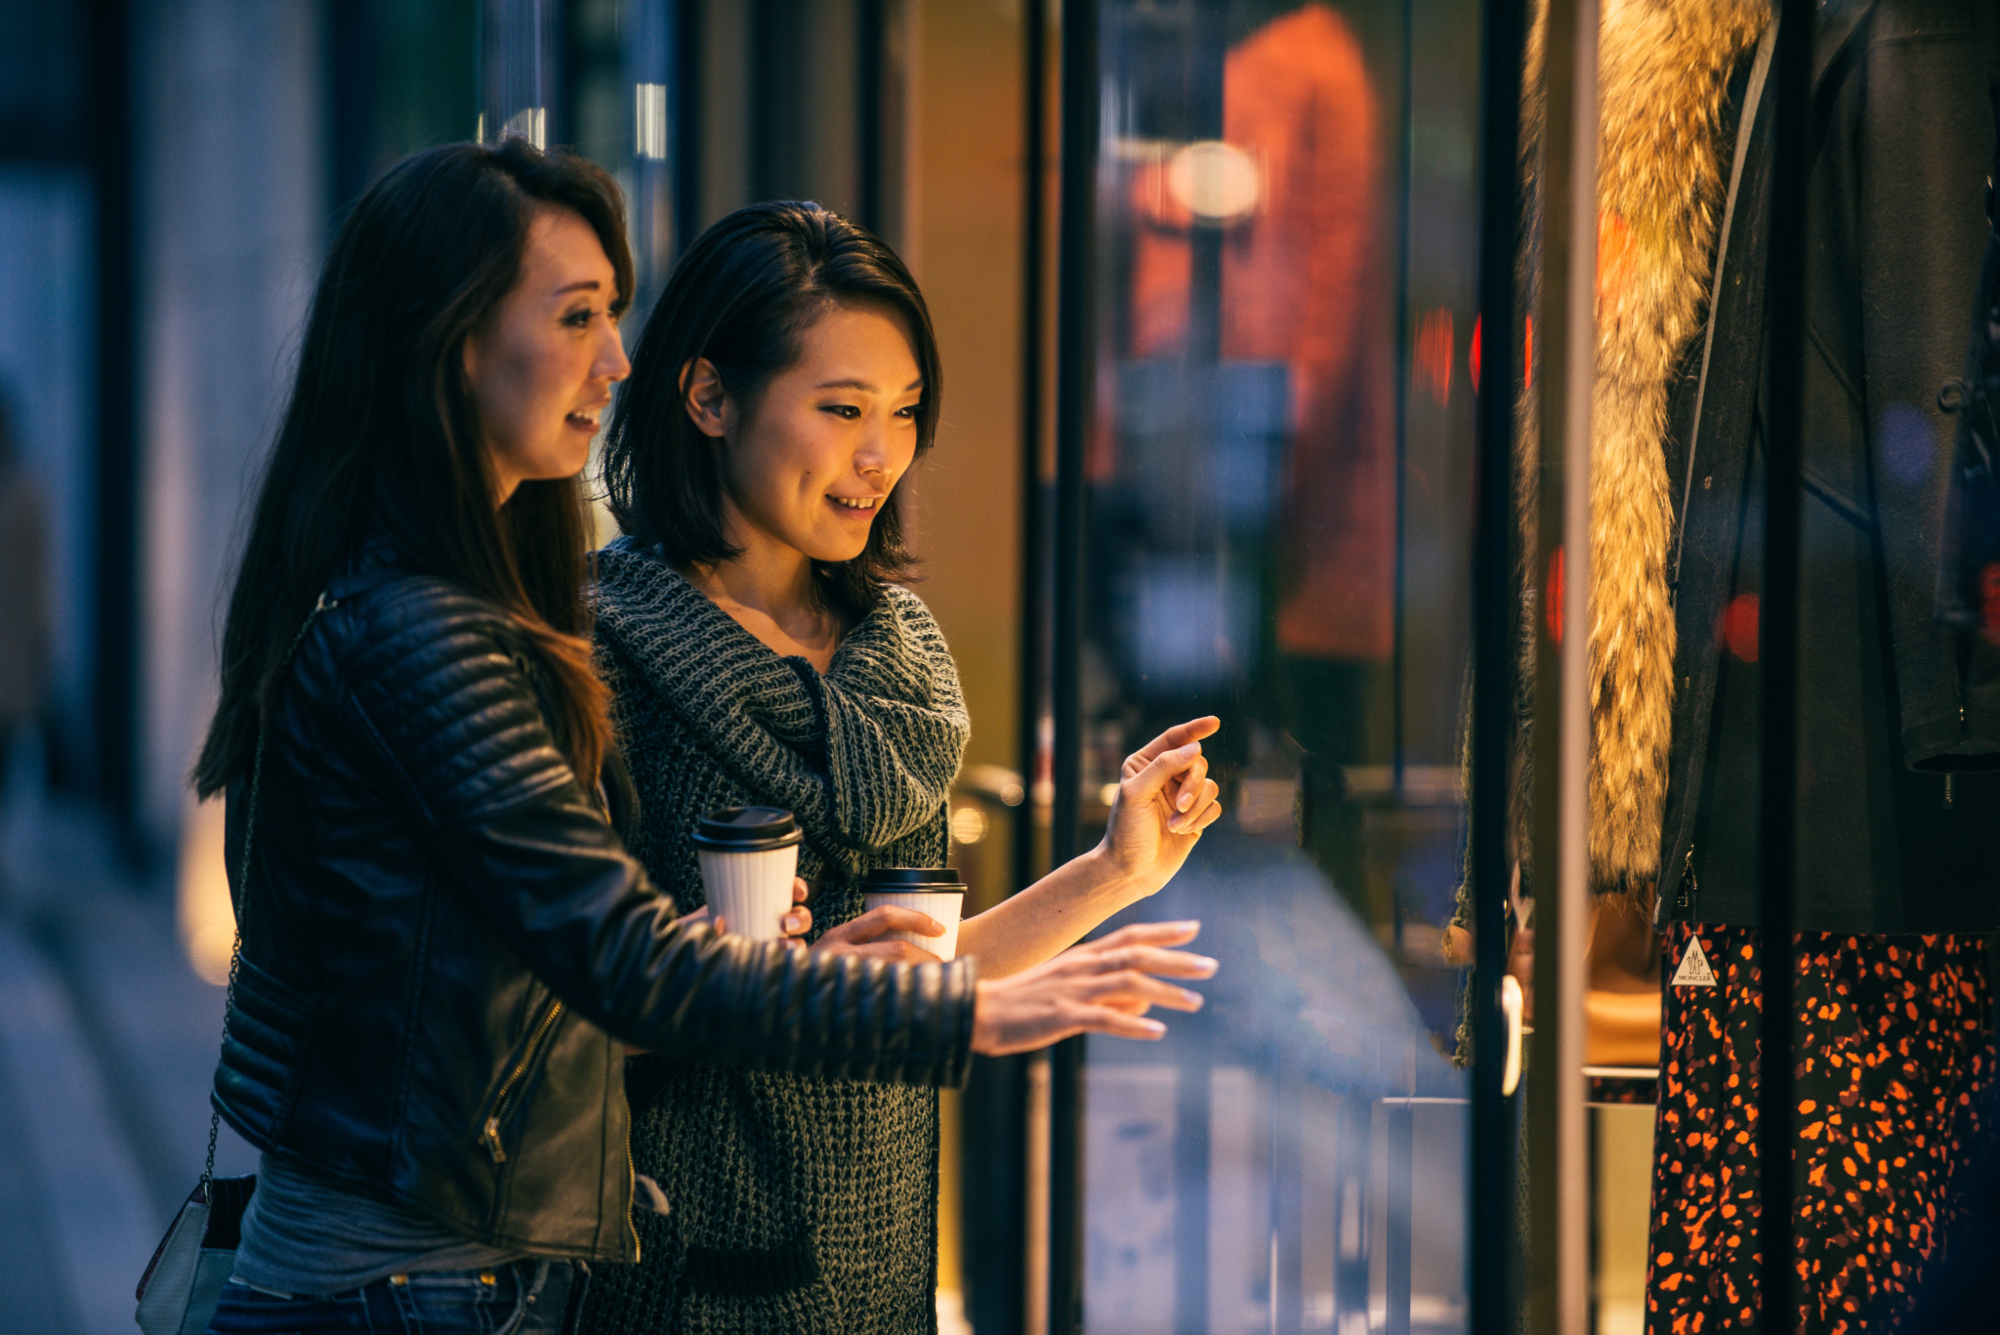 two women window shopping at night, pointing at something through the outdoor glass of a store